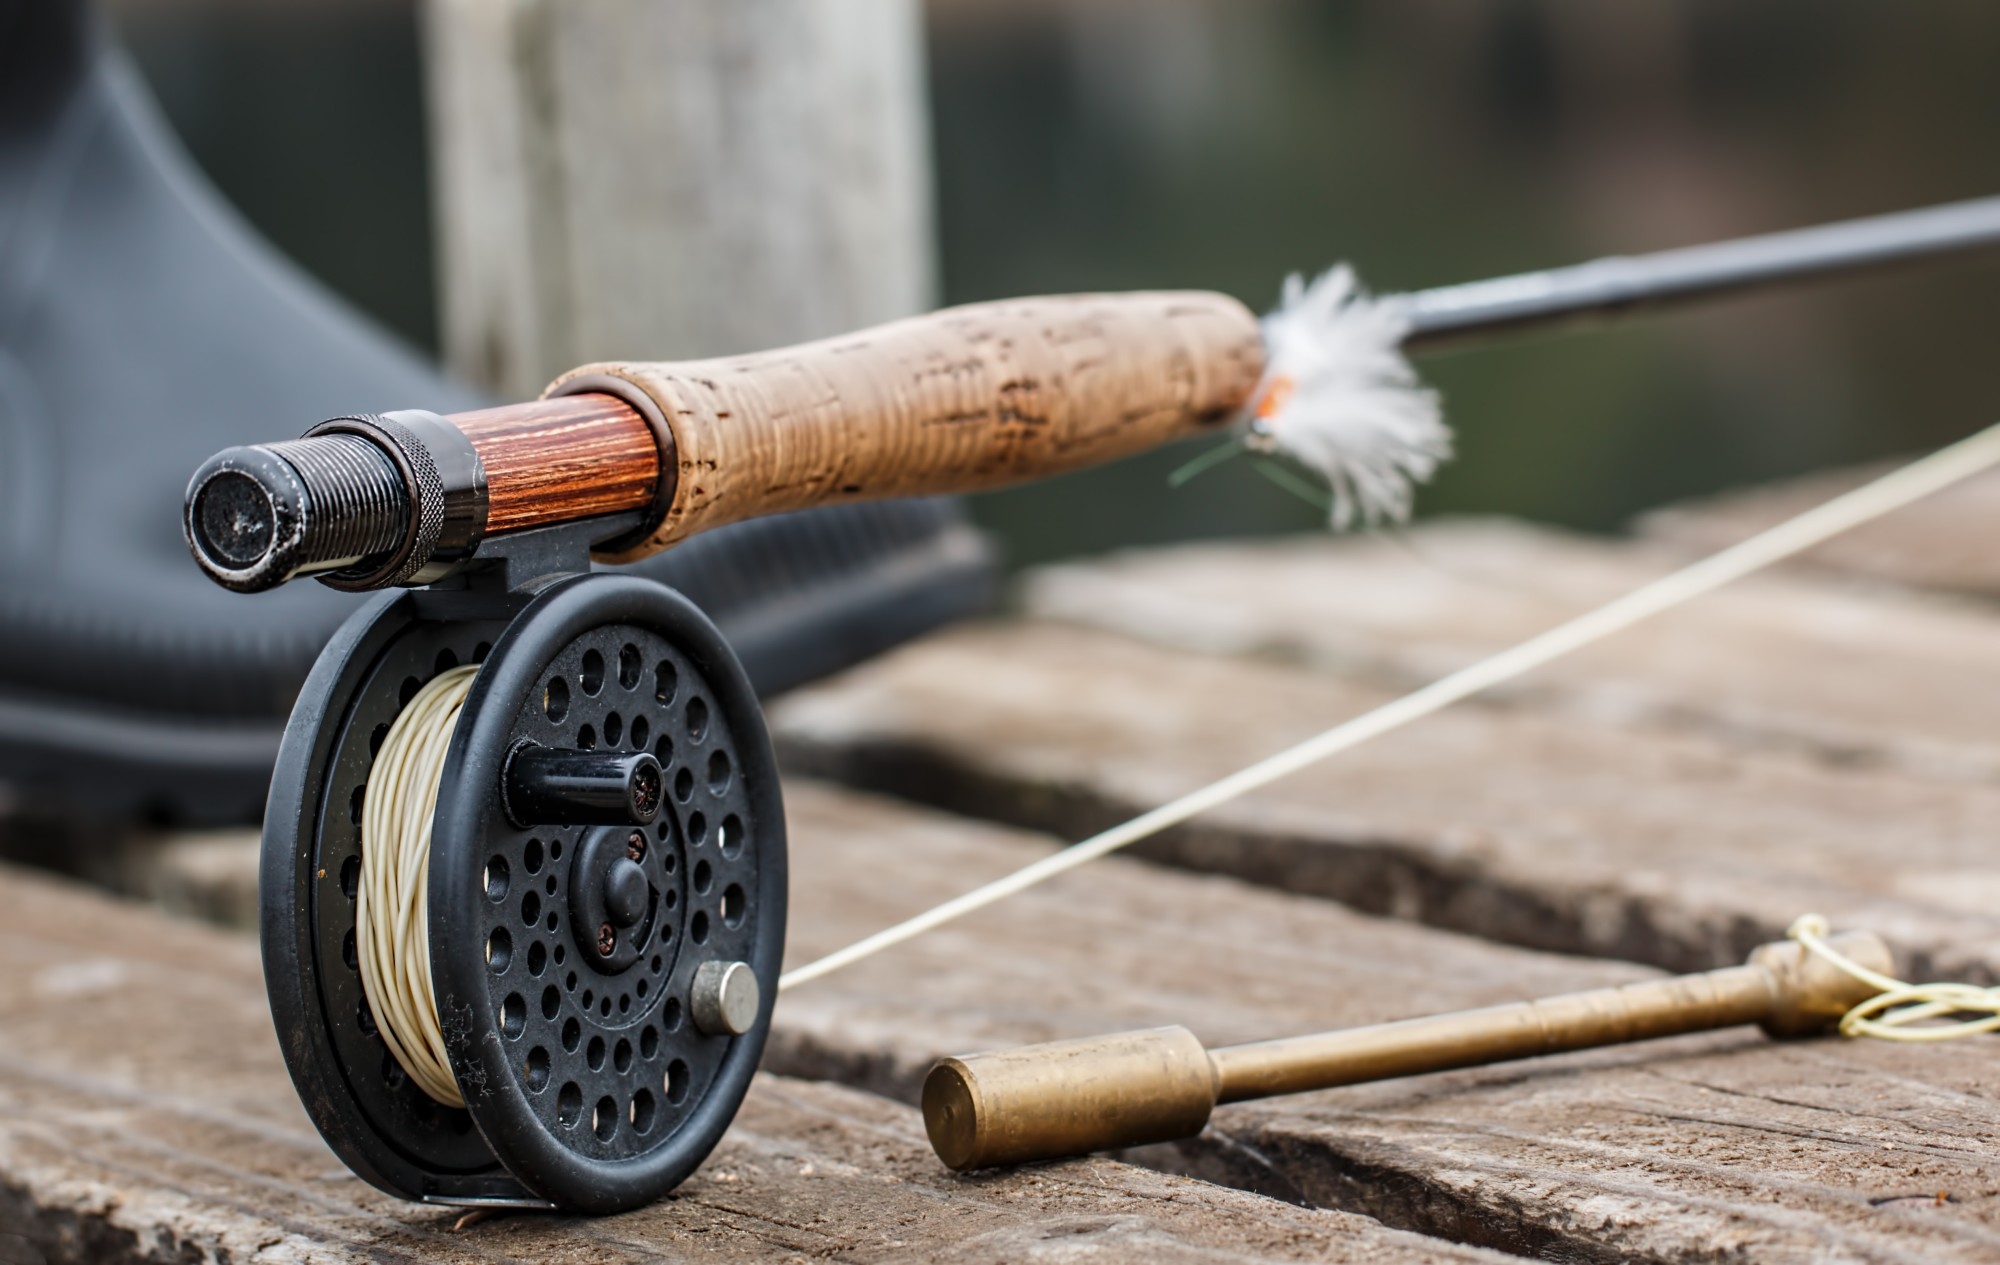 Essential Fishing Gear for Anglers: Must-Have Equipment and How to